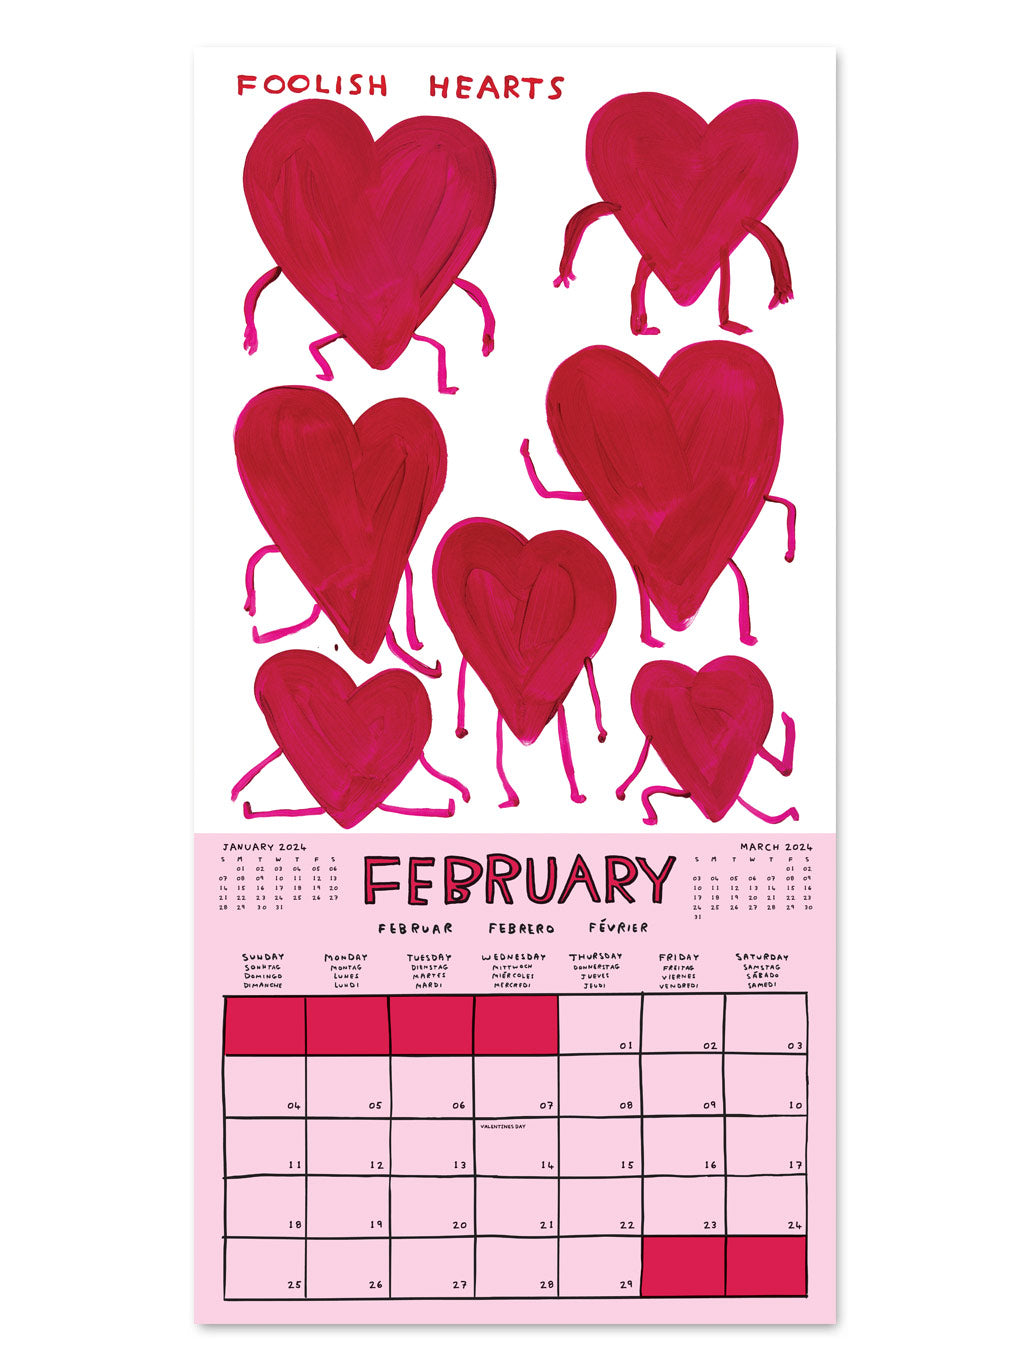 An example of the layout of a 2024 calendar by artist David Shrigley. February shows a baby pink calendar section with a box allocated to each day of the month. The artwork on the top half of the page has a white background and shows 7 painted lovehearts with arms and legs with the words - Foolish hearts.